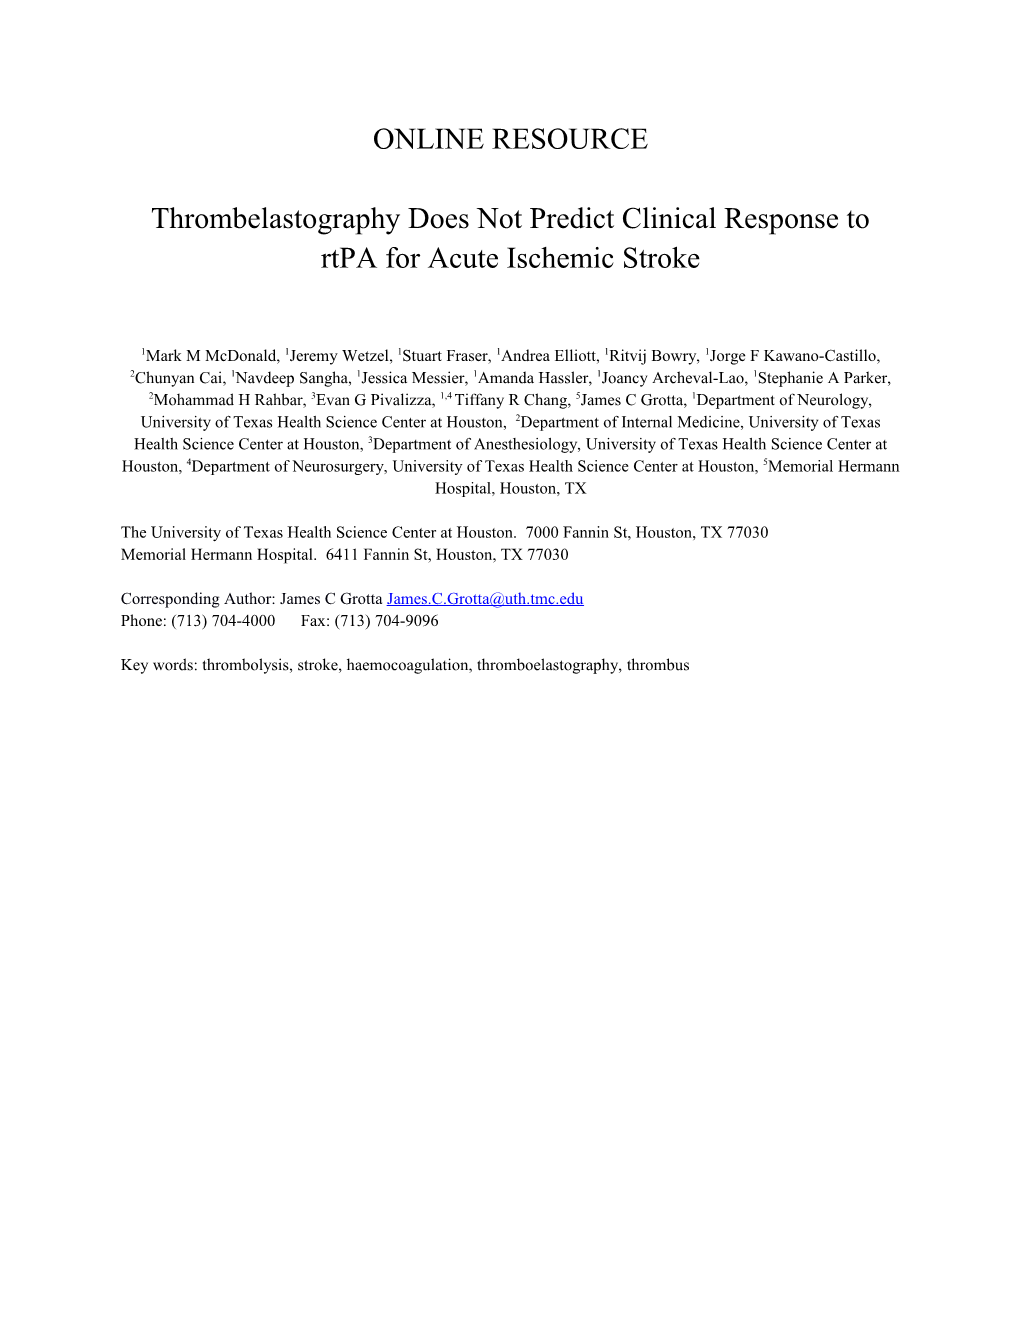 Thrombelastography Does Not Predict Clinical Response to Rtpa for Acute Ischemic Stroke